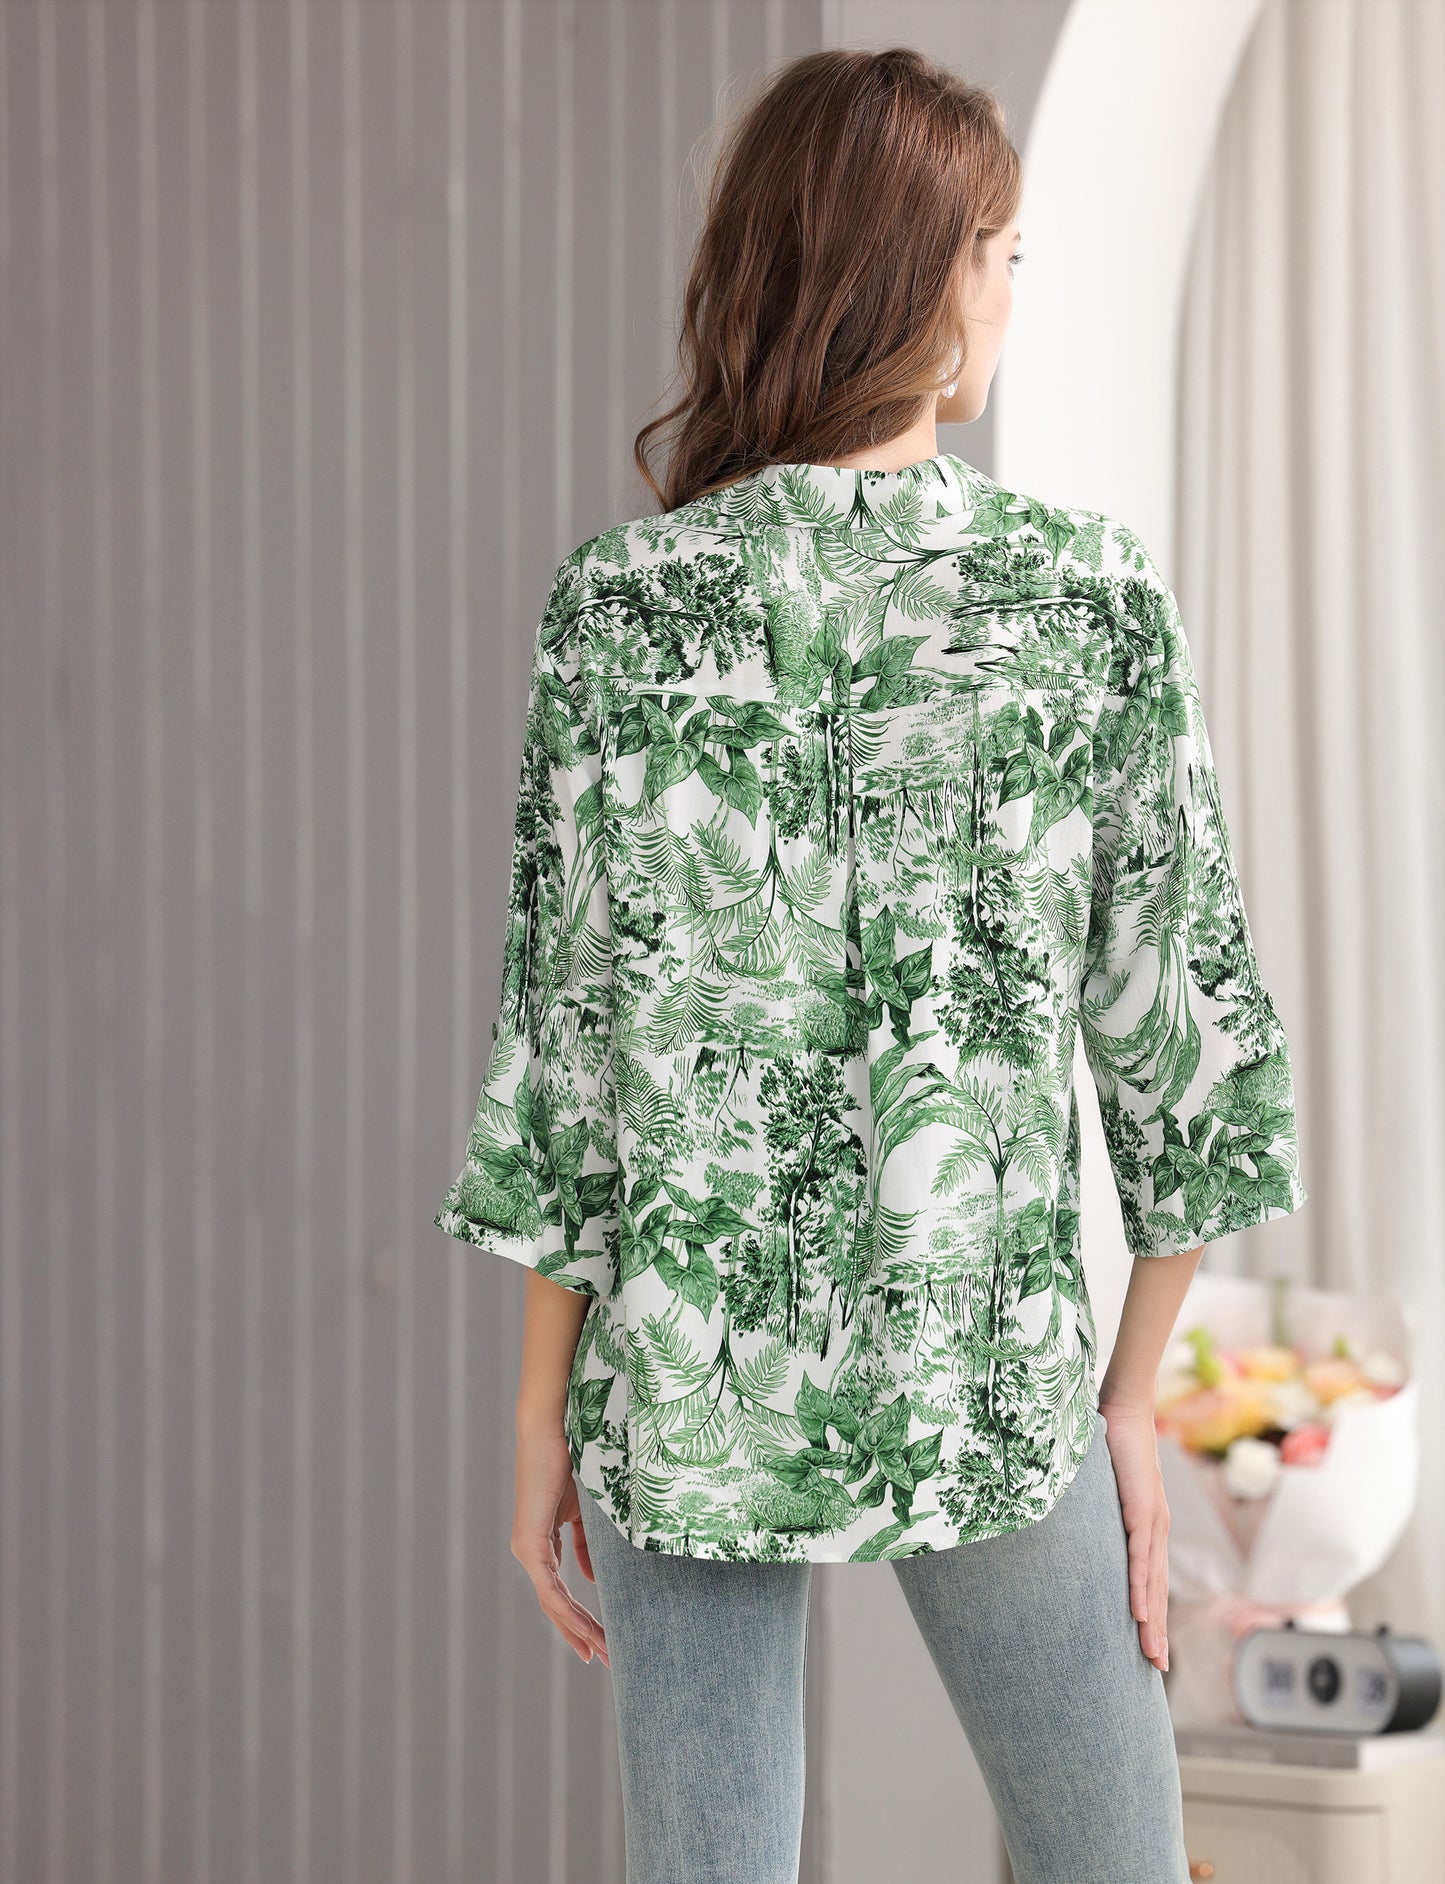 Women's Floral Printed Button Down Shirt with 3/4 Sleeves